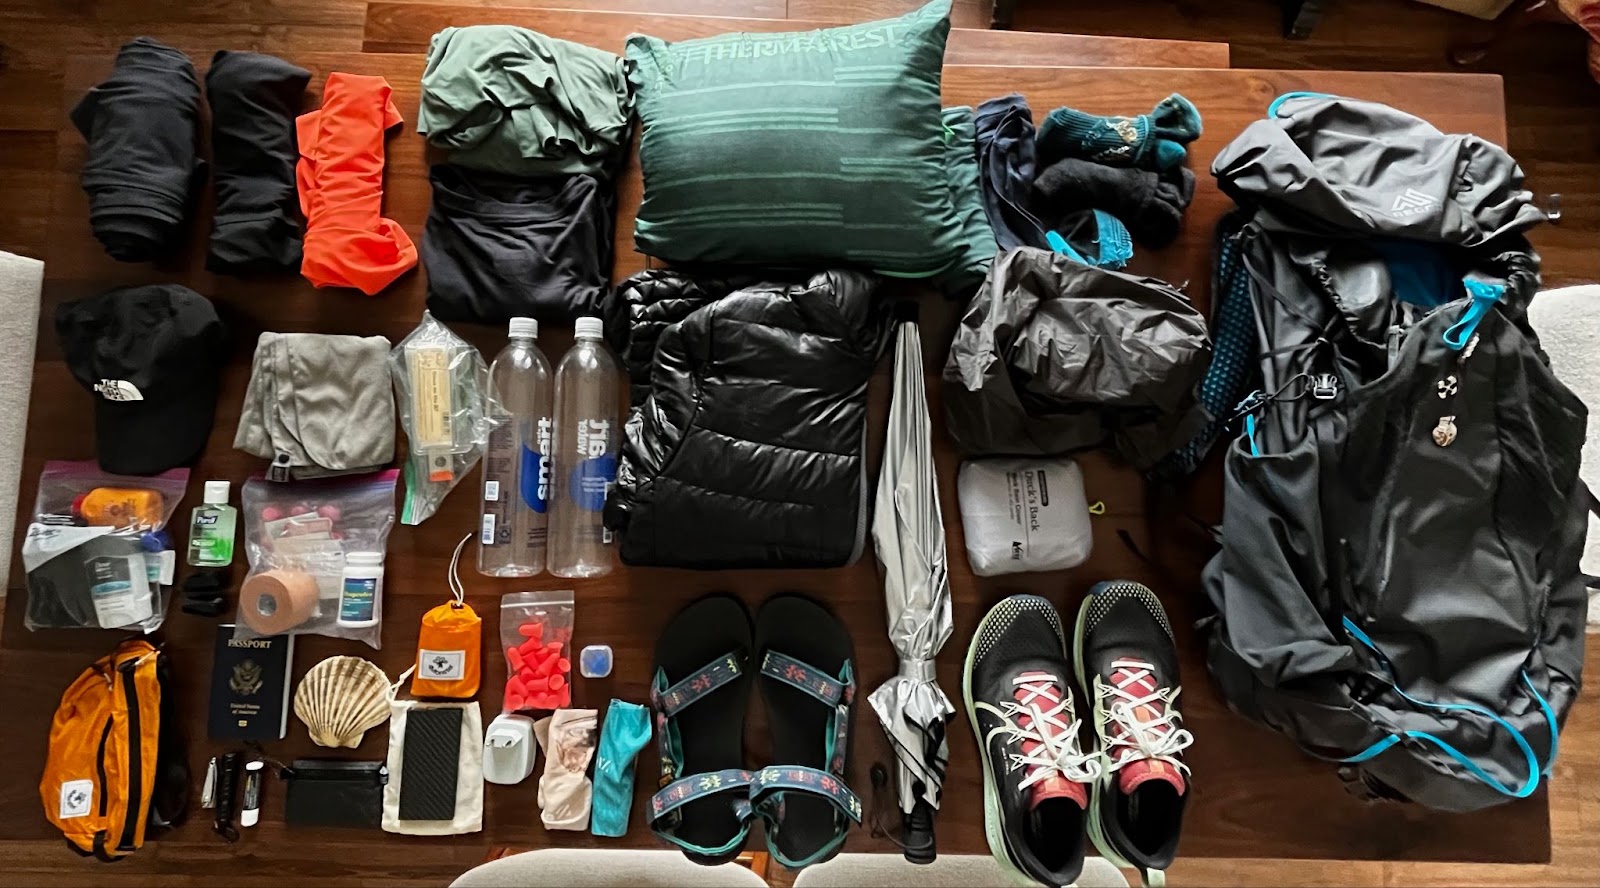 Packing list and itinerary for the Camino de Santiago